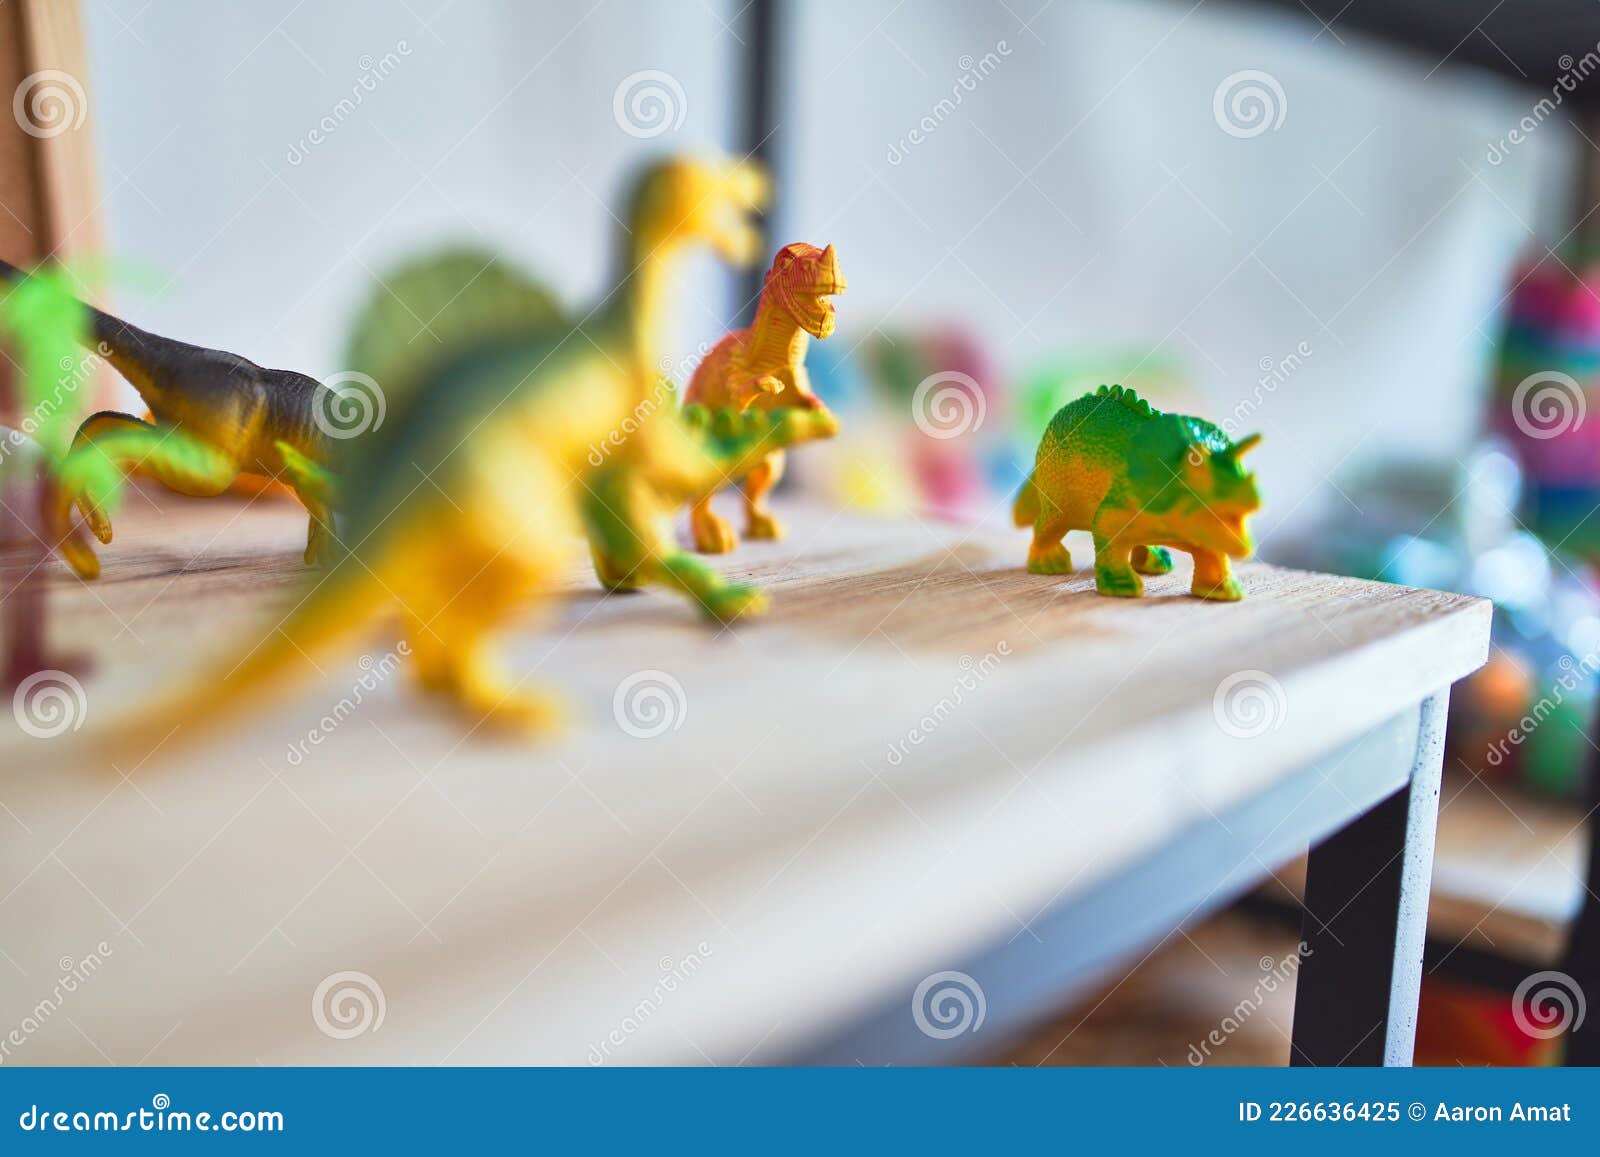 shelving with plastico dinosaurs toys at kindergarten